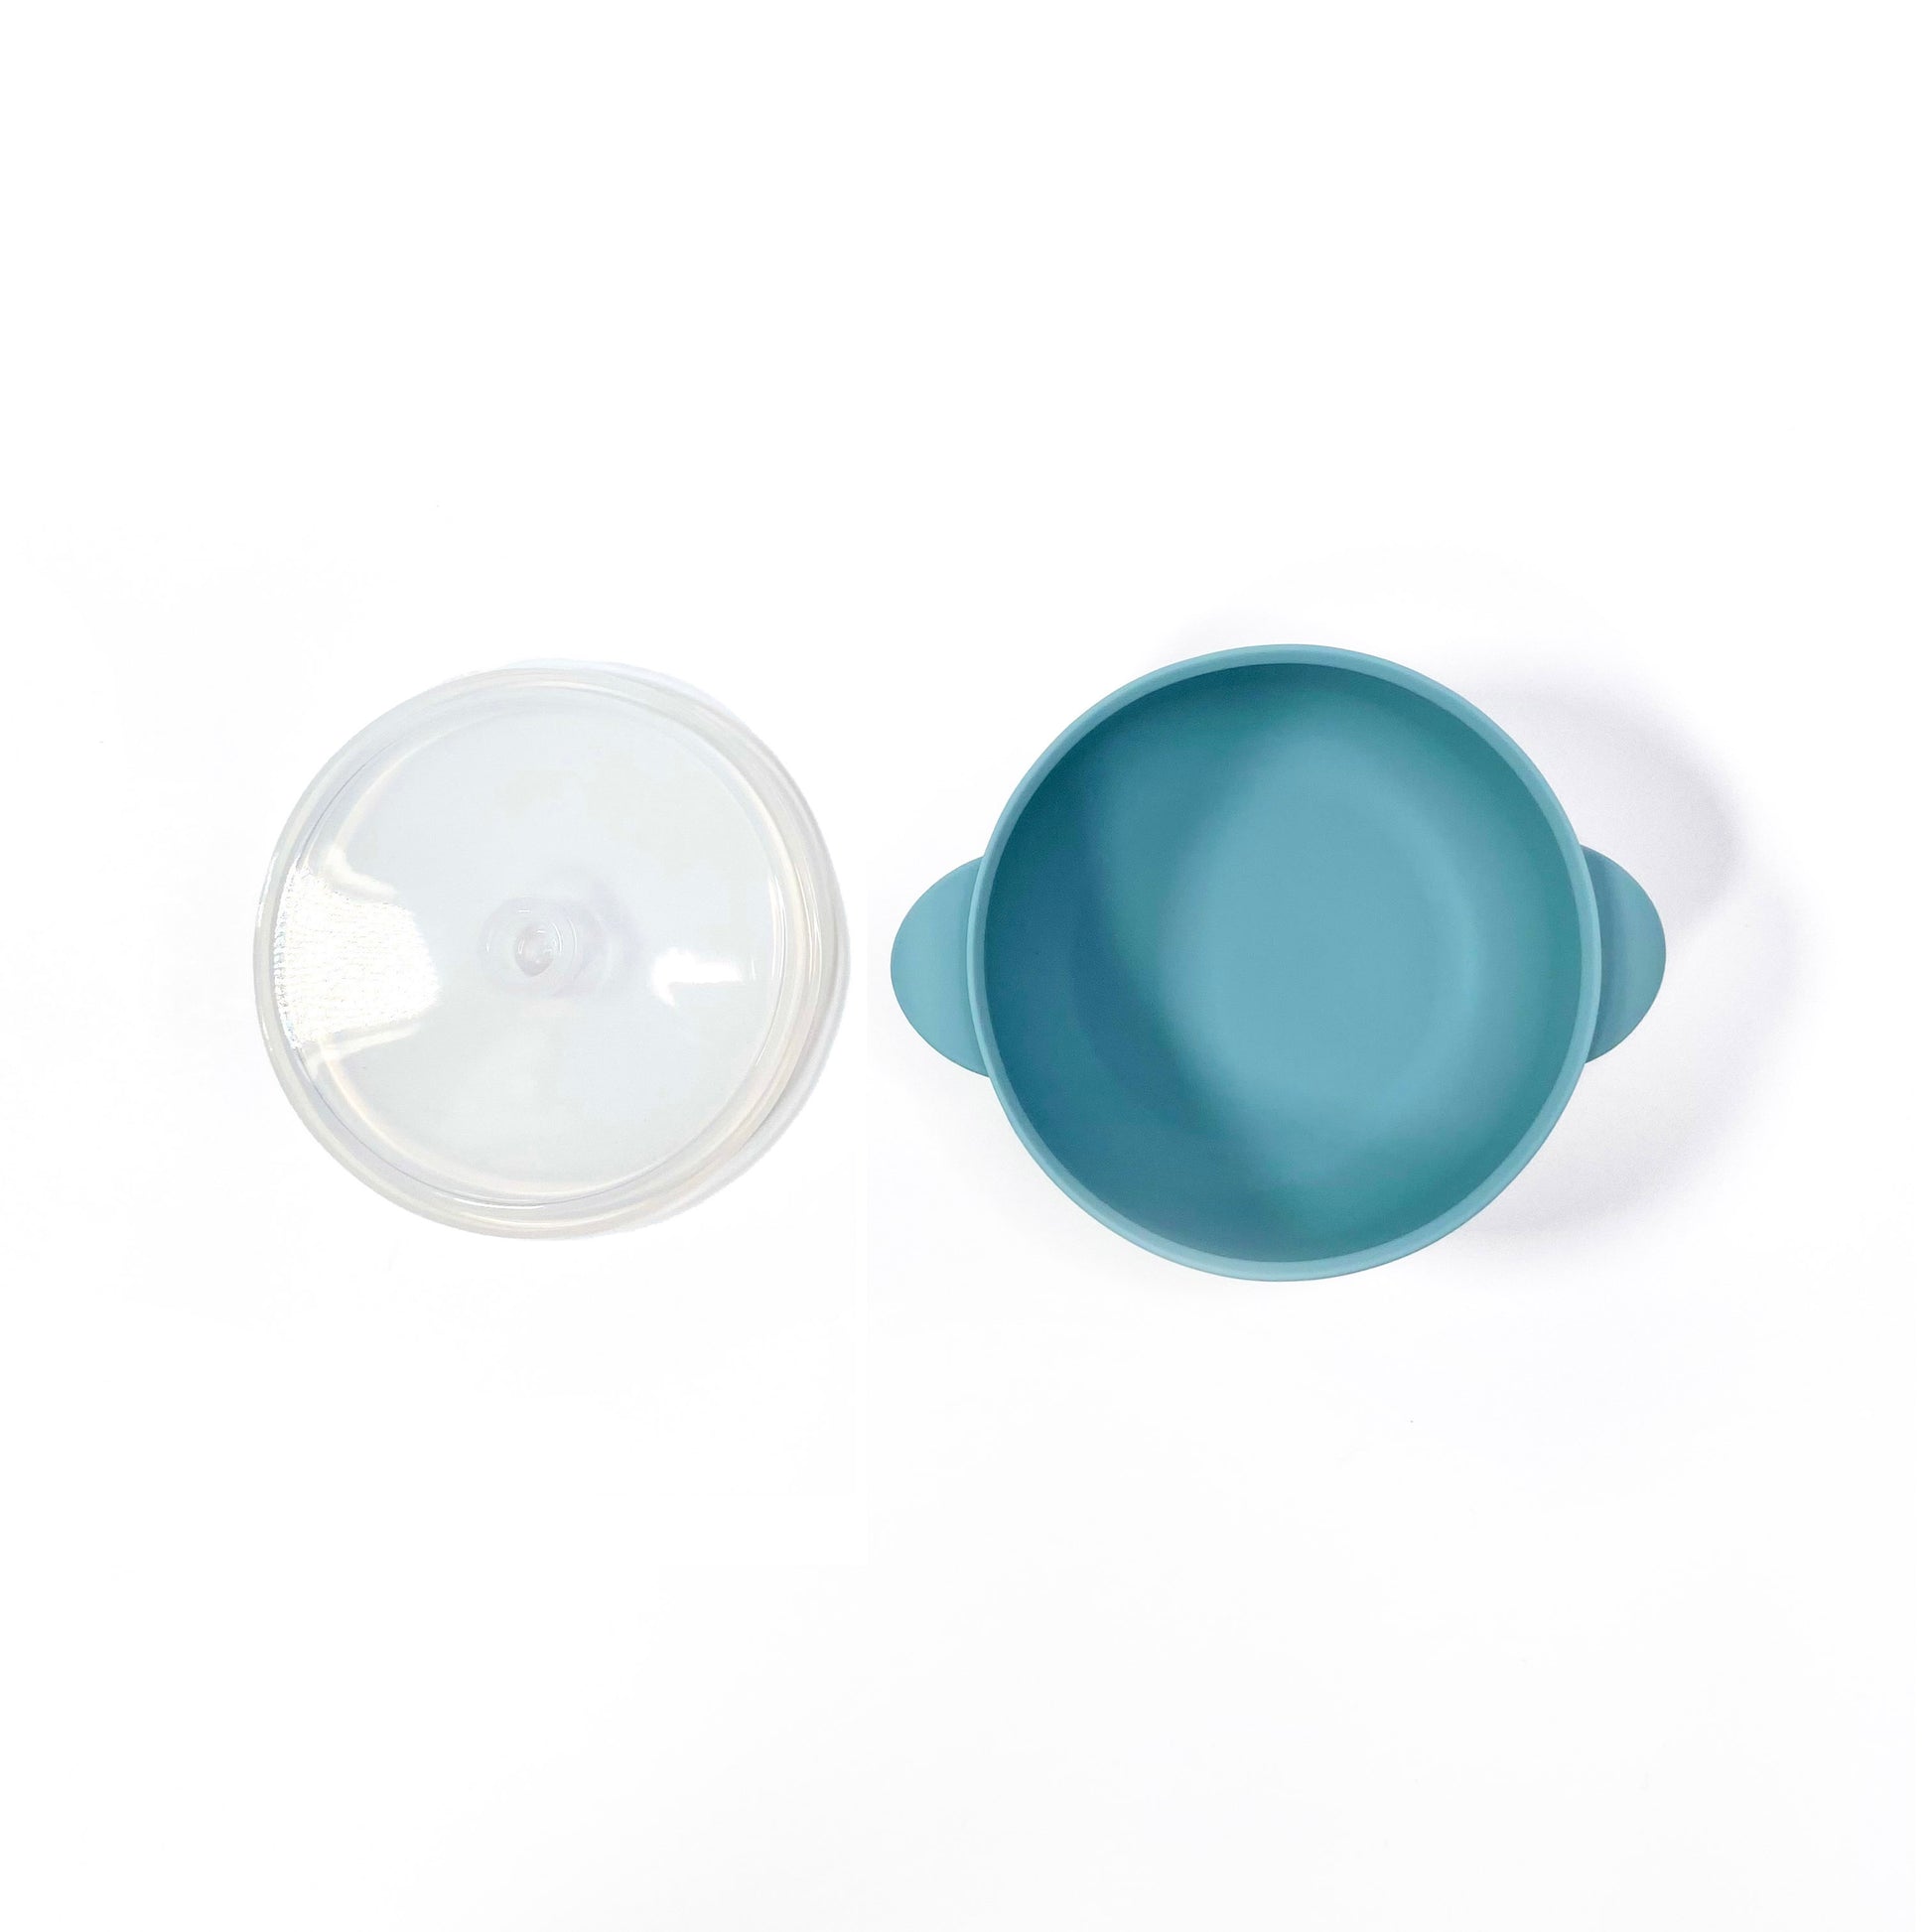 A sky blue silicone children’s feeding bowl, with lid and suction cup. Image shows the bowl with lid separately.